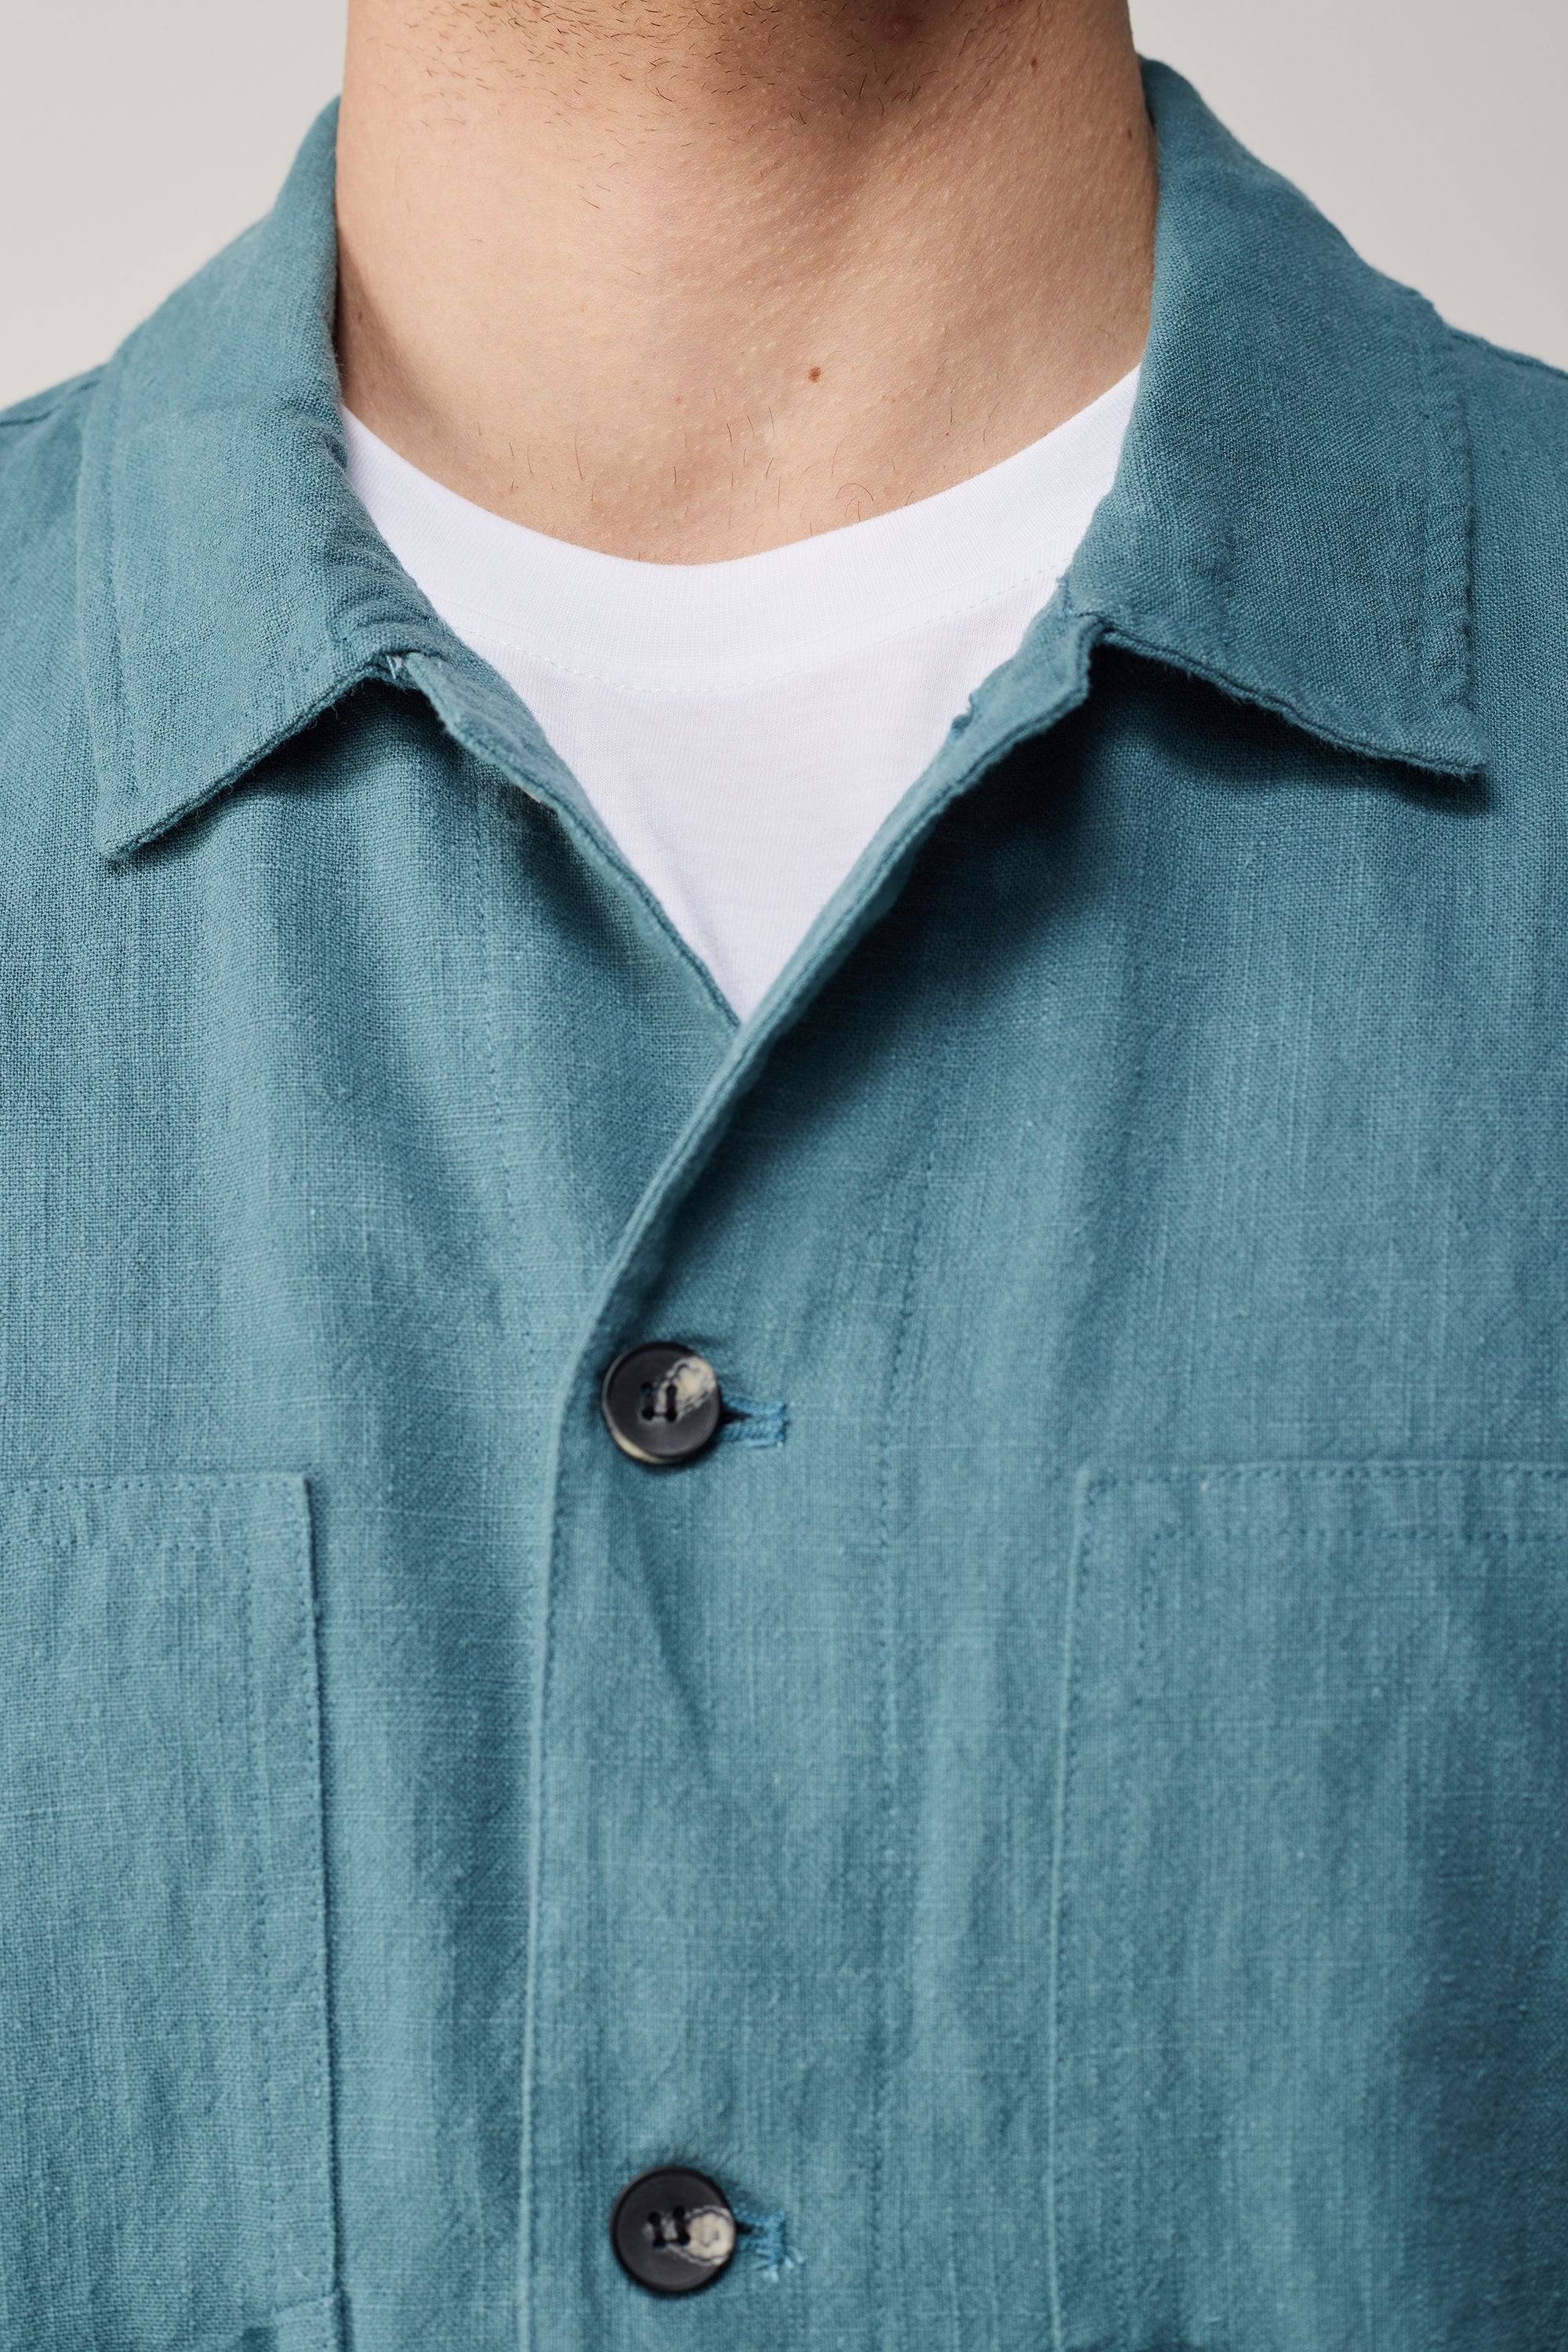 a close up of a person wearing a blue shirt